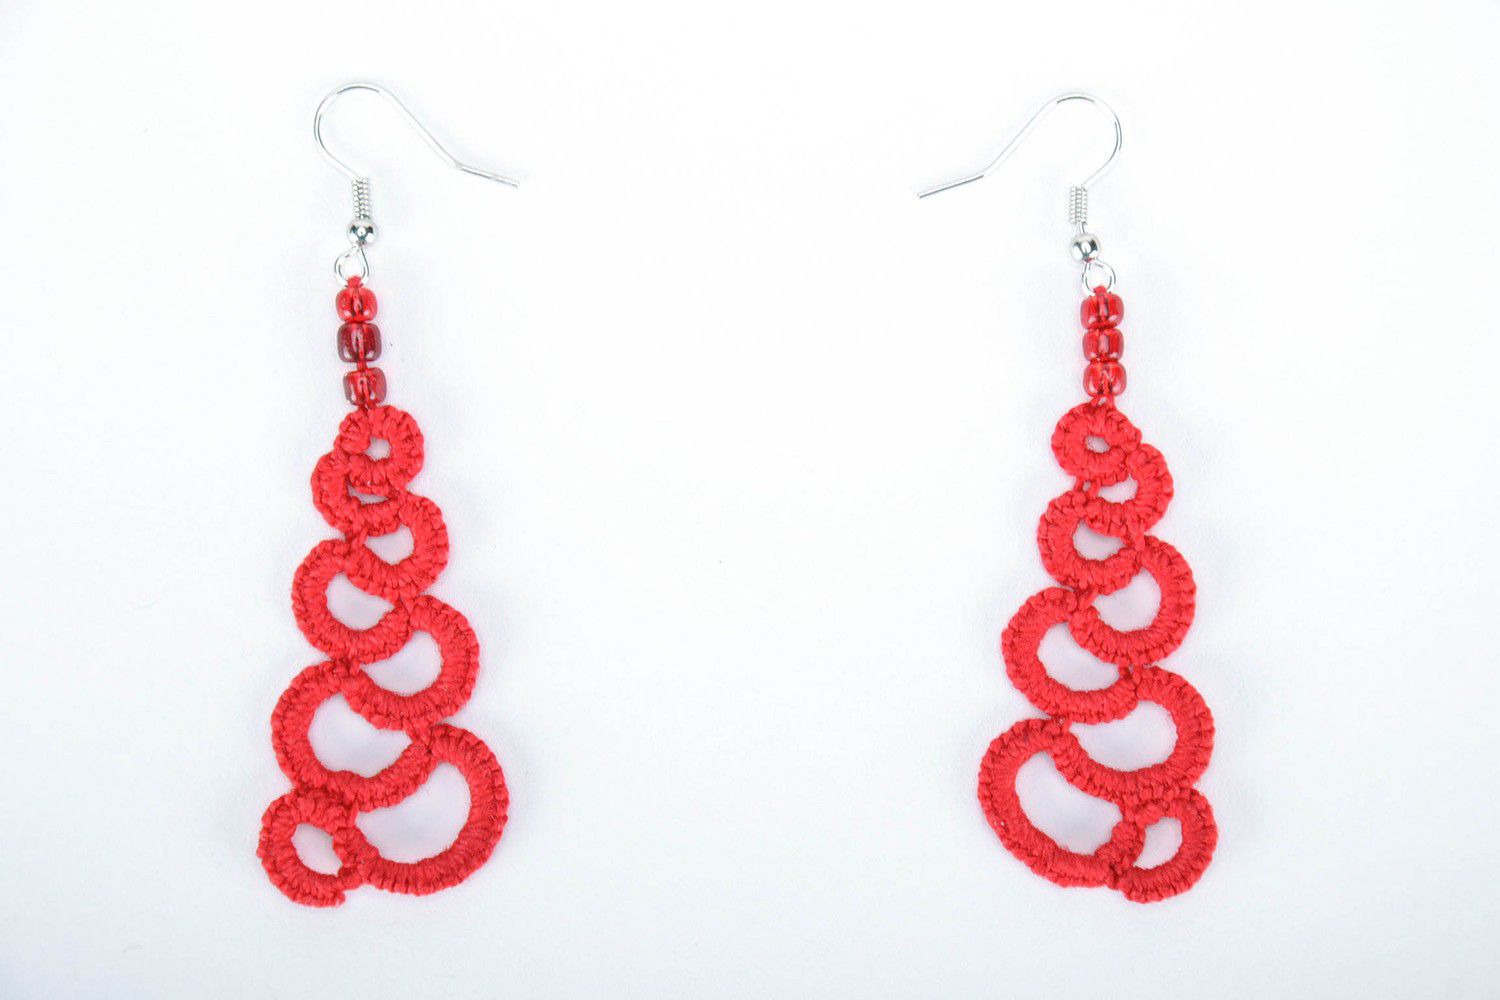 Scarlet earrings made from woven lace photo 3